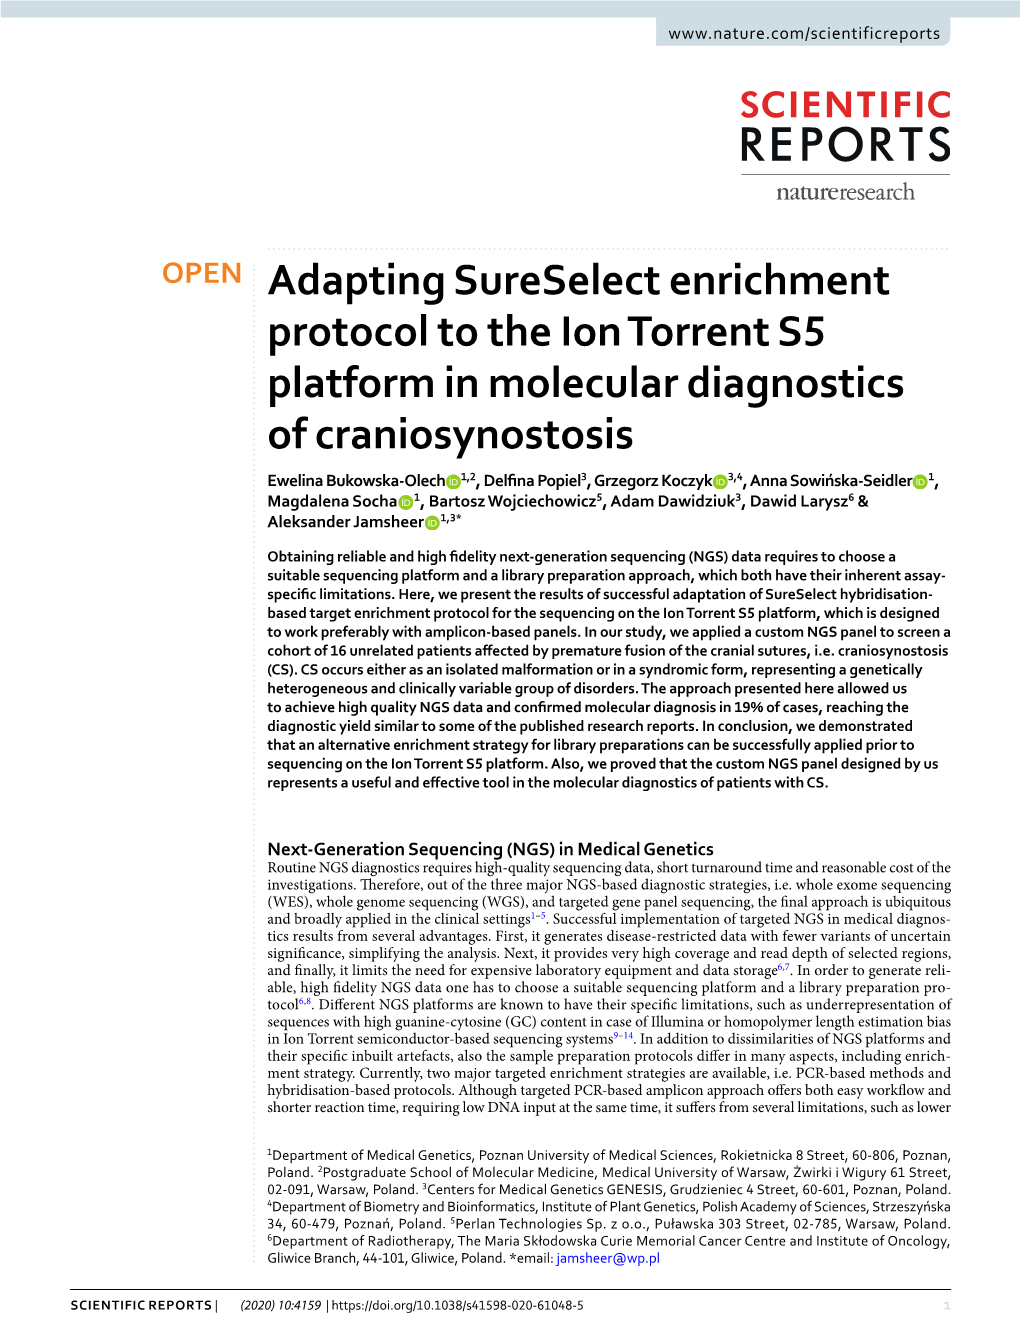 Adapting Sureselect Enrichment Protocol to the Ion Torrent S5